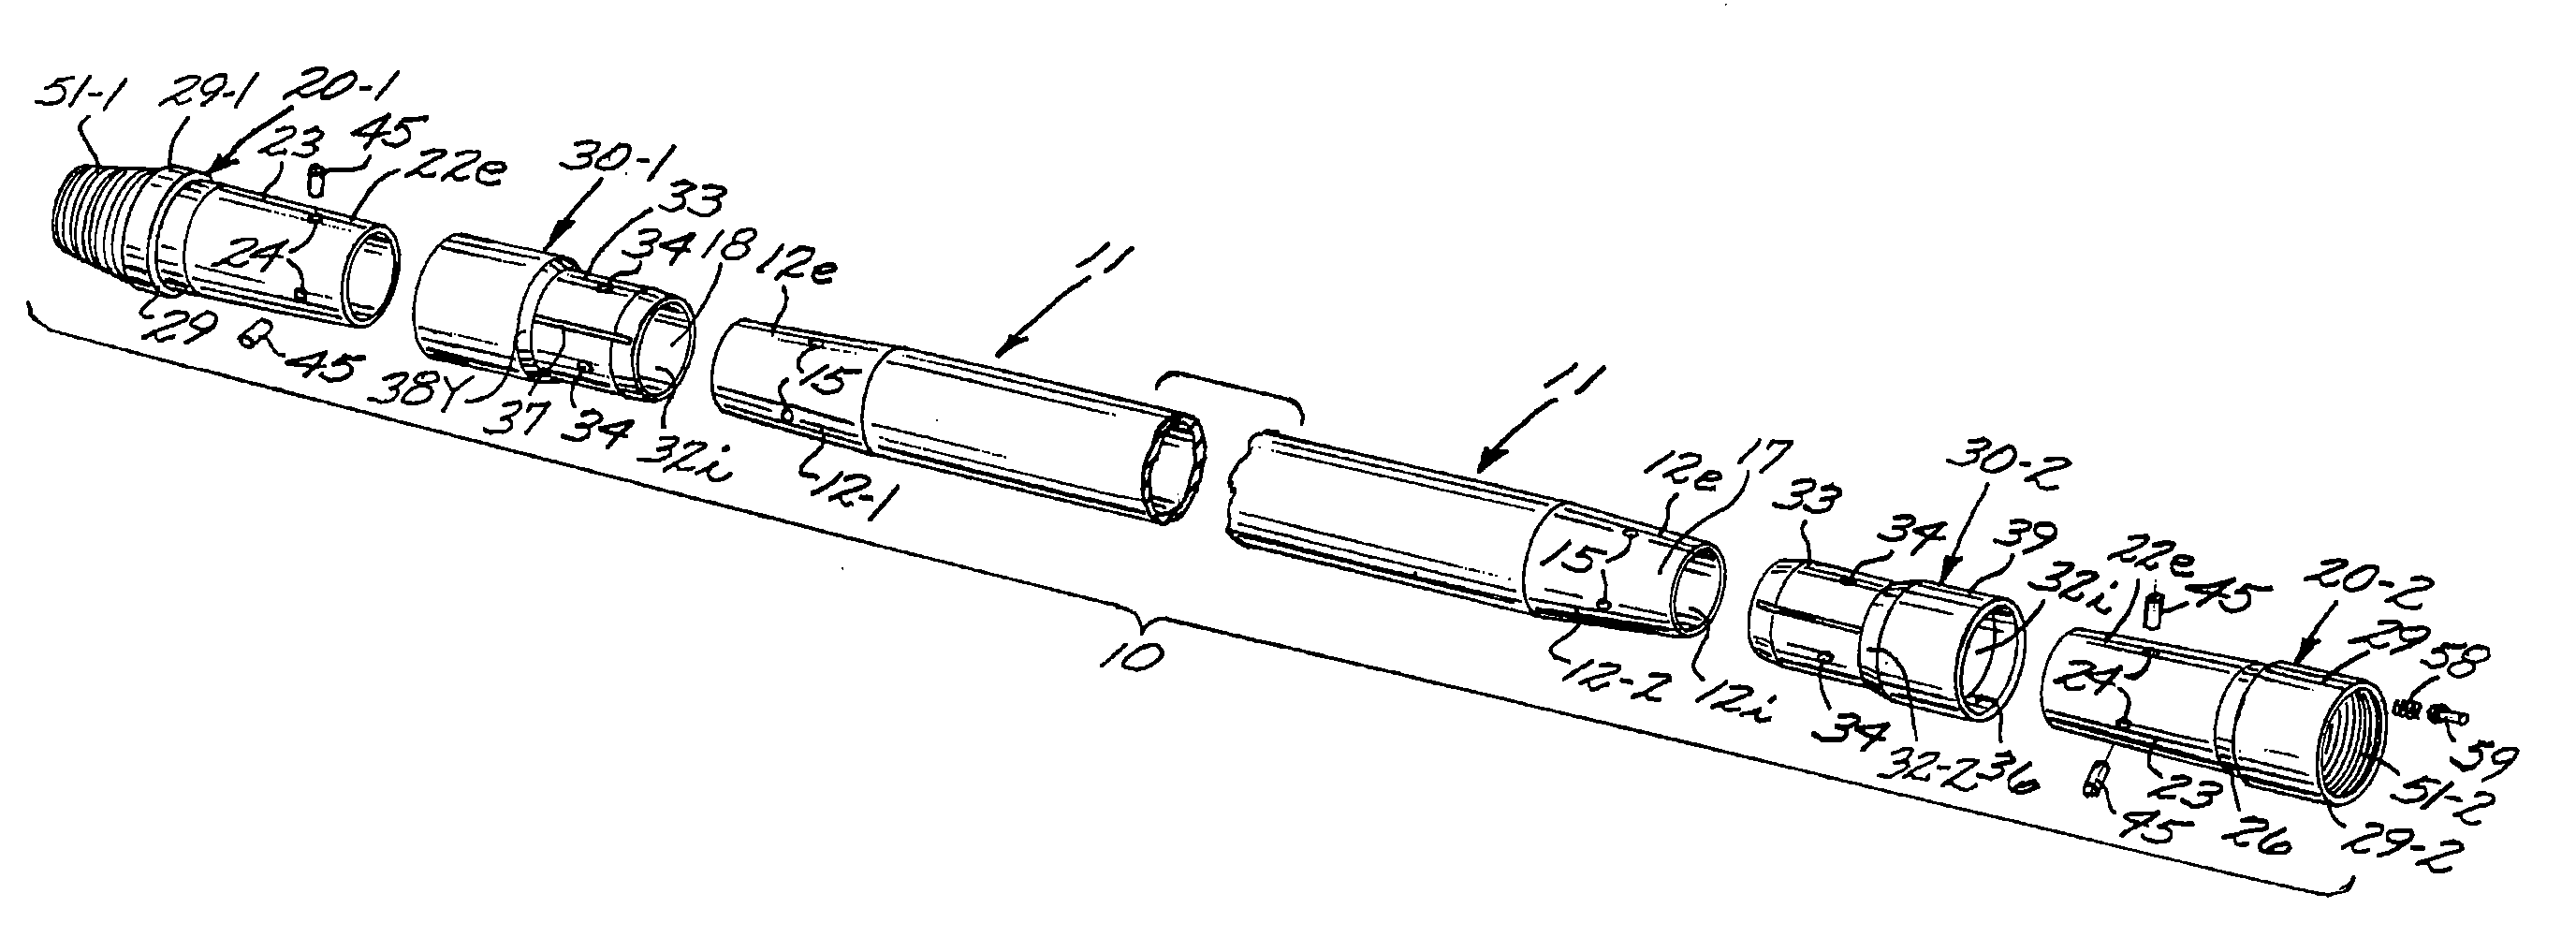 Composite drill pipe and method of forming same